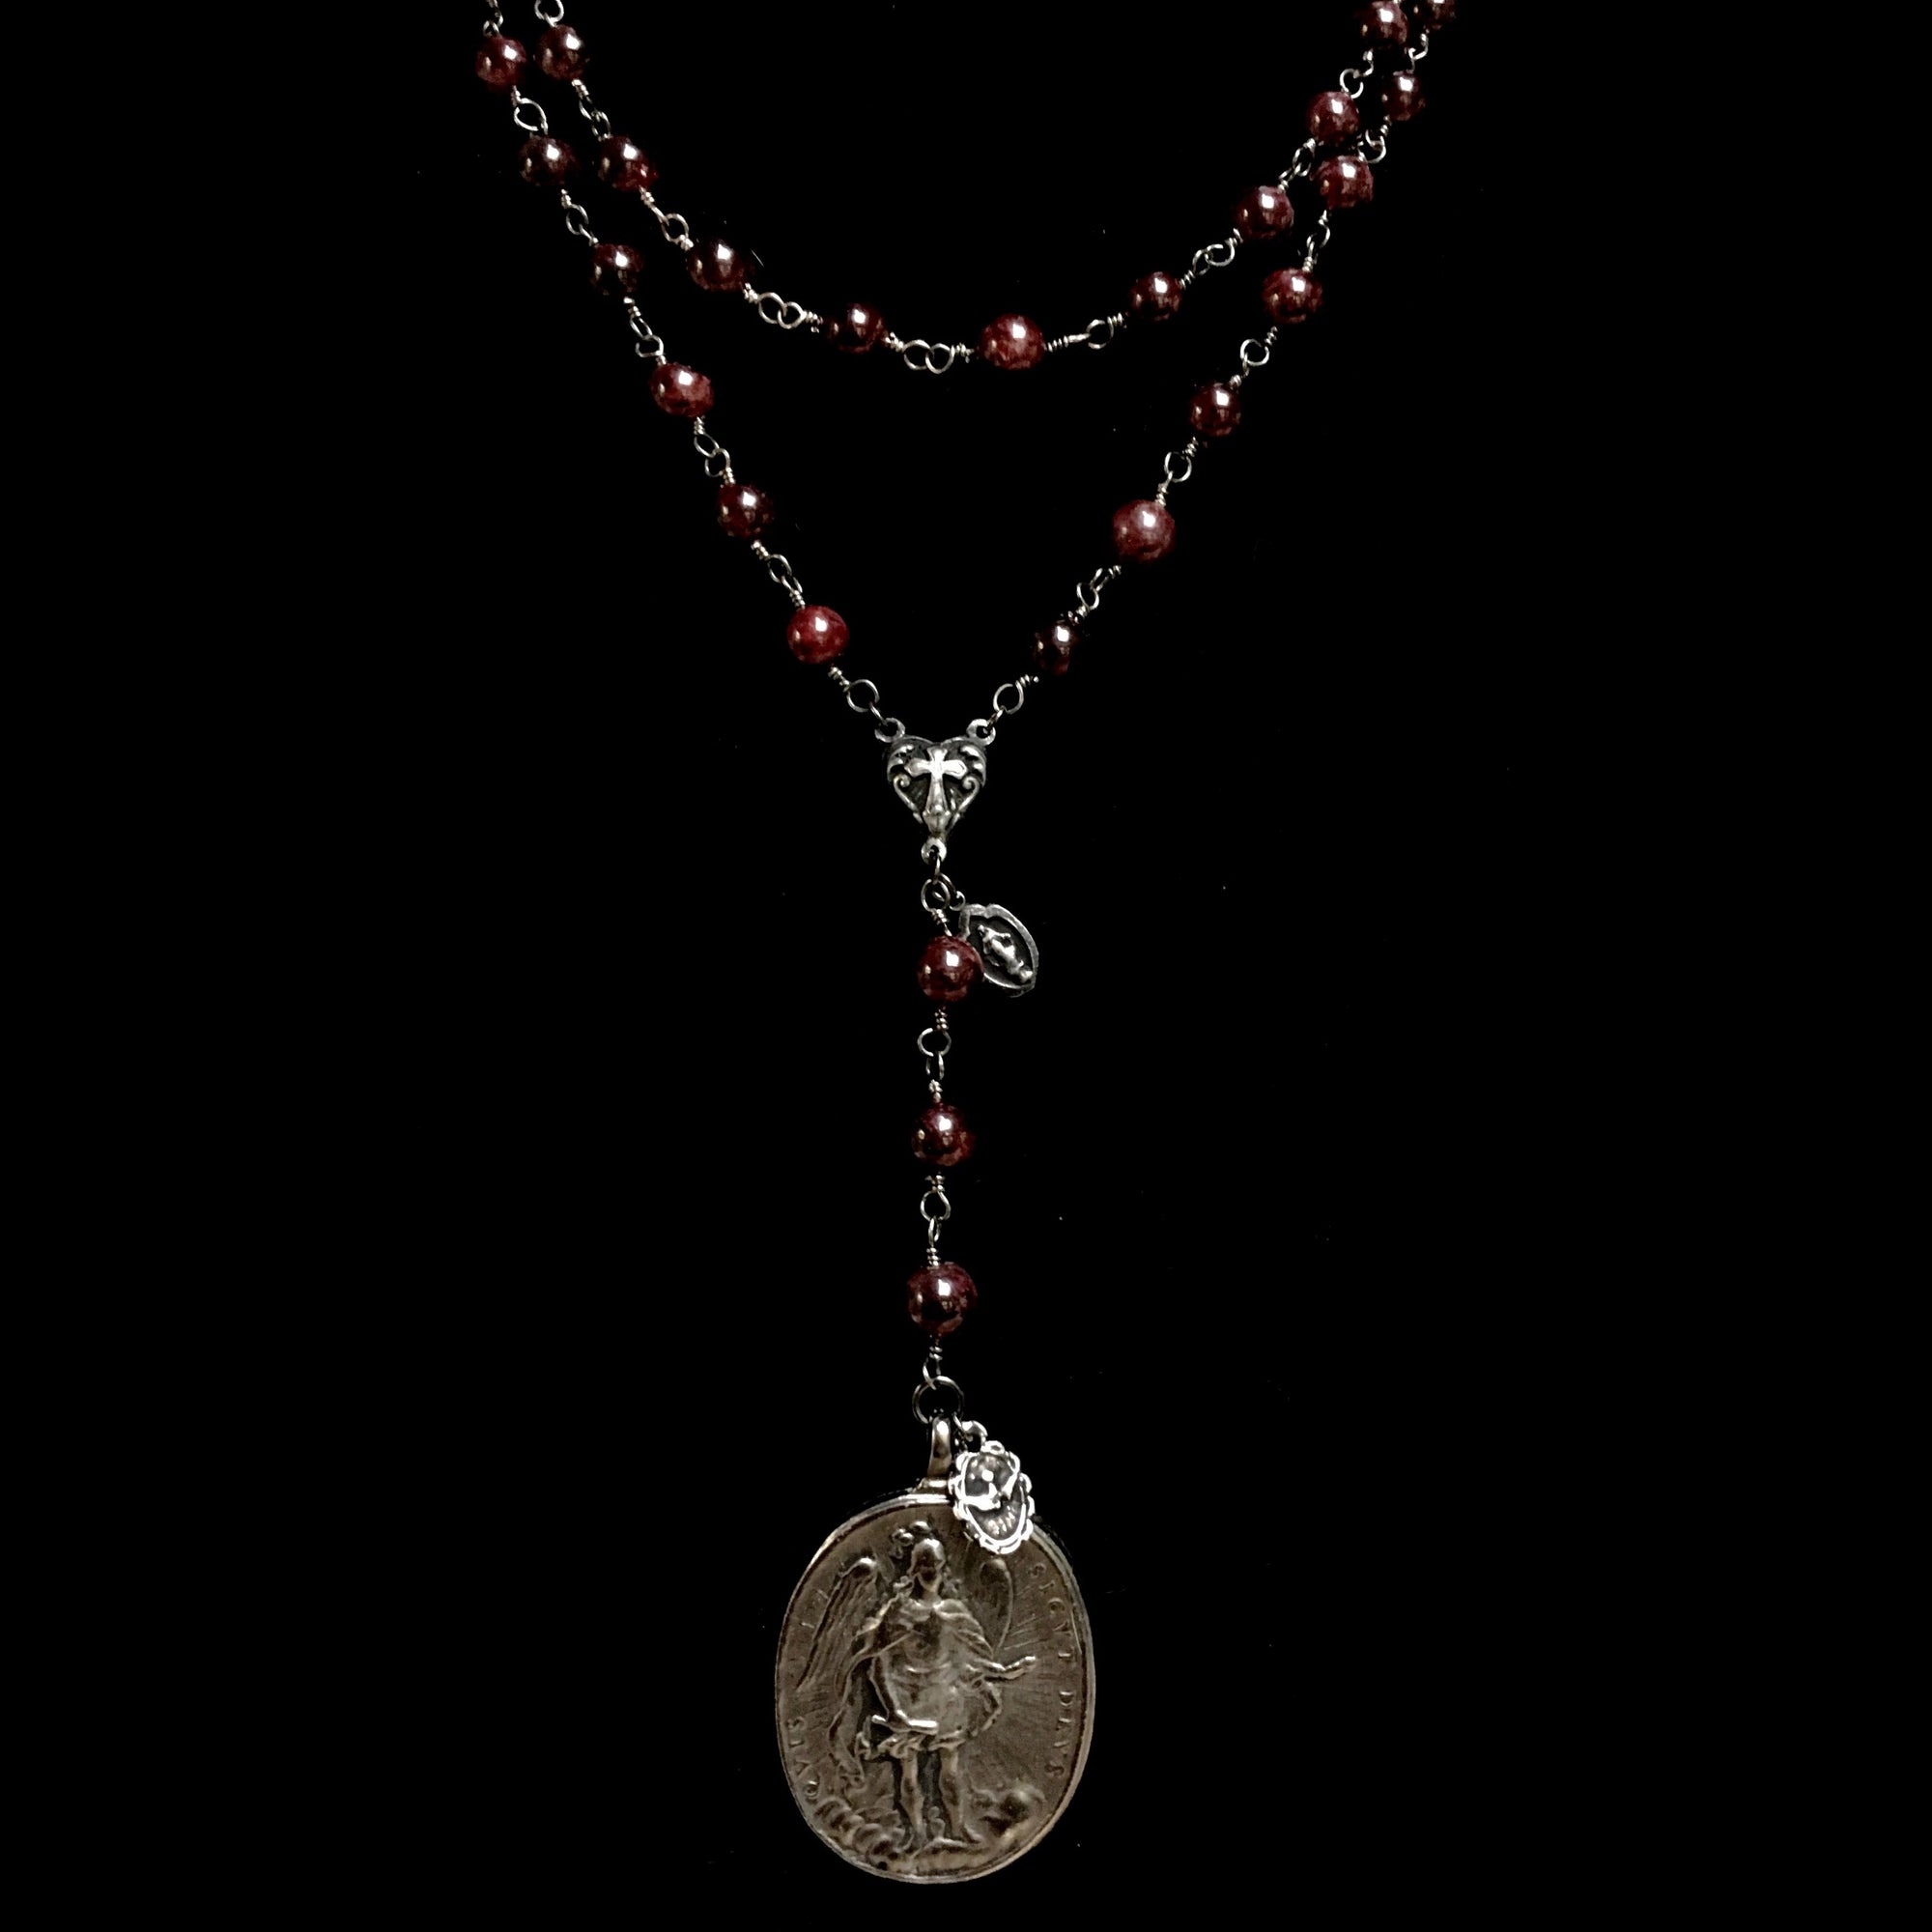 Garnet Cristo Rey Rosary Necklace with Saint Michael & Guadalupe in Gunmetal